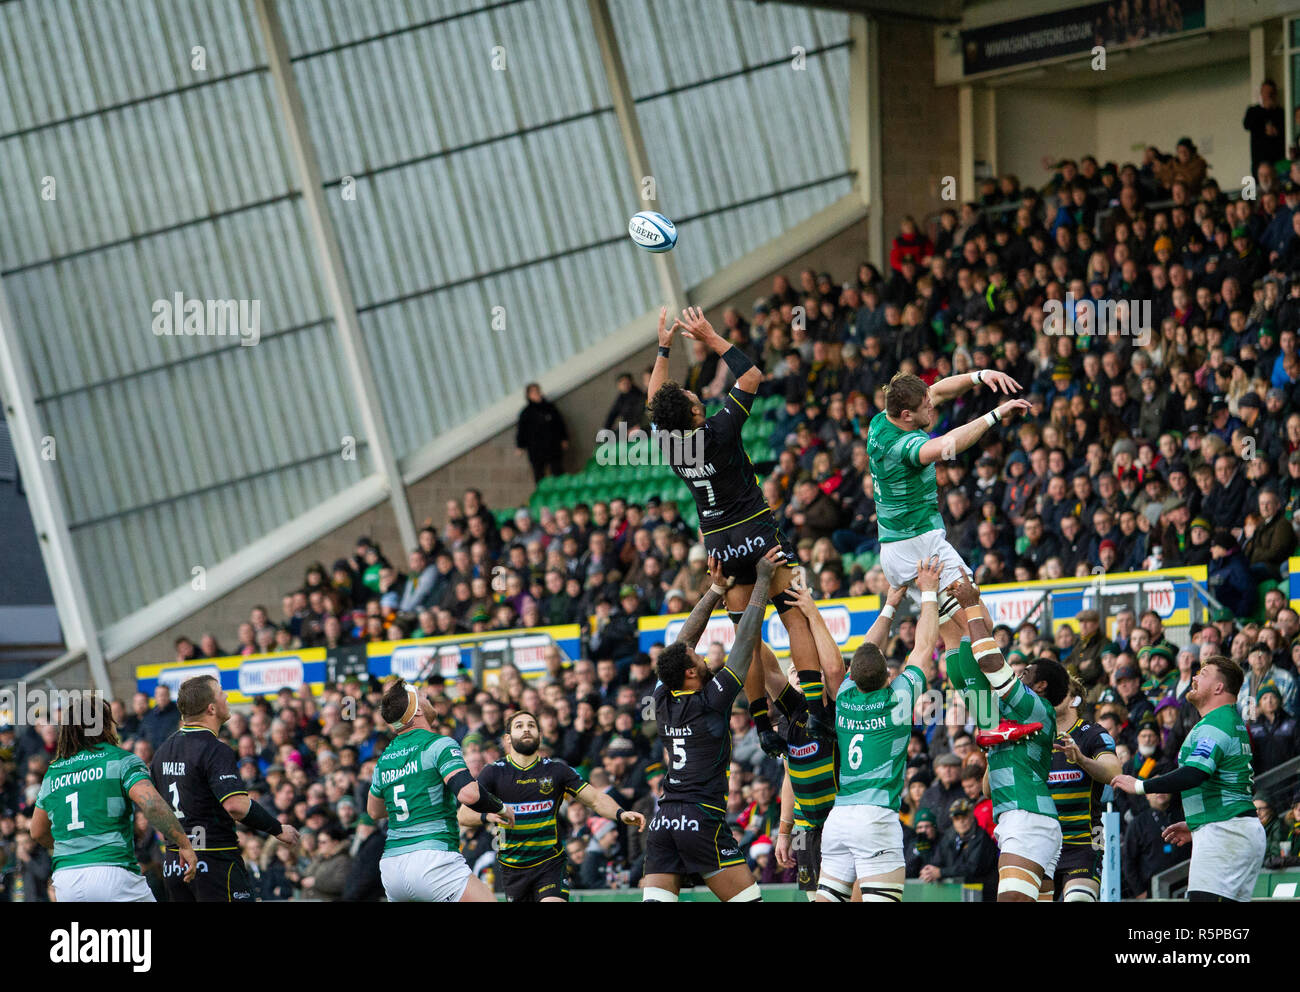 Northampton, UK. 1st December 2018. Lewis Ludlam of Northampton Saints Takes a line out ball during the Gallagher Premiership Rugby match between Northampton Saints and Newcastle Falcons. Andrew Taylor/Alamy Live News Stock Photo